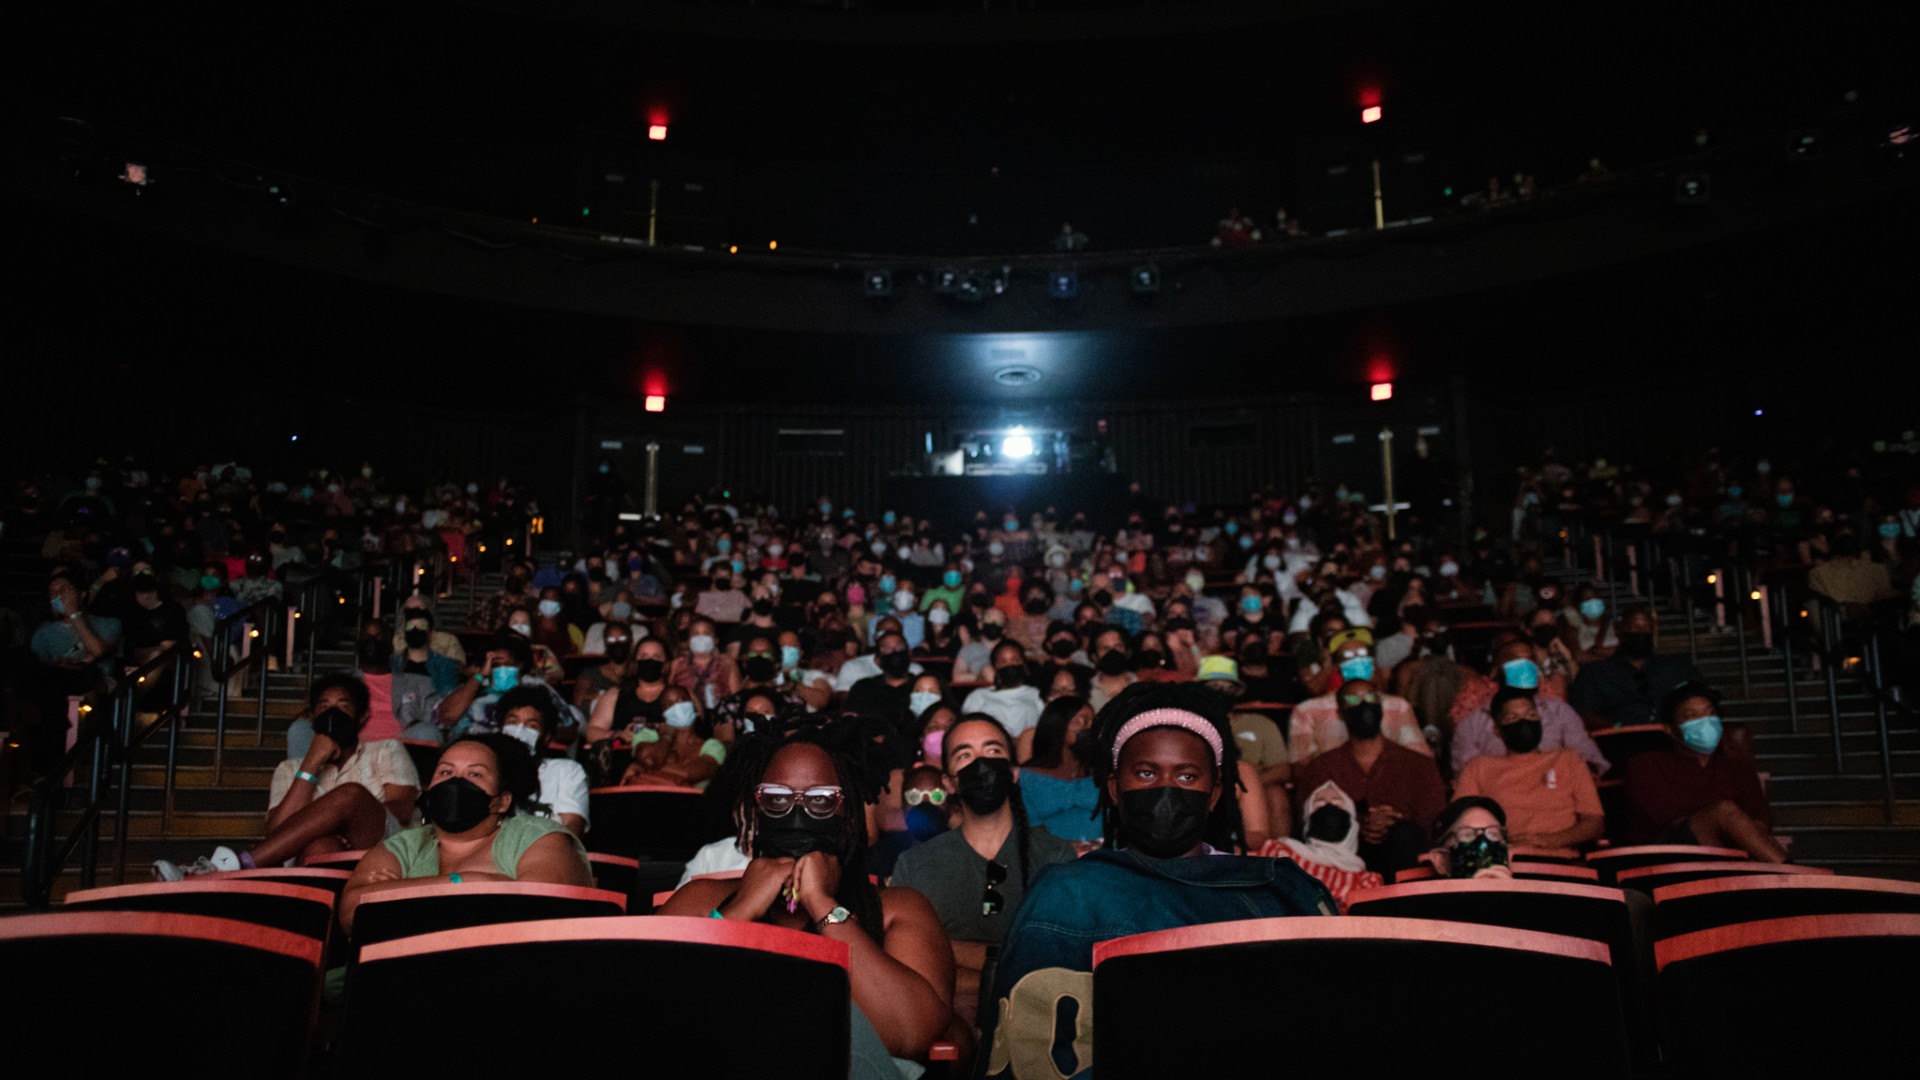 A photo of a packed theater. The guests are wearing masks.